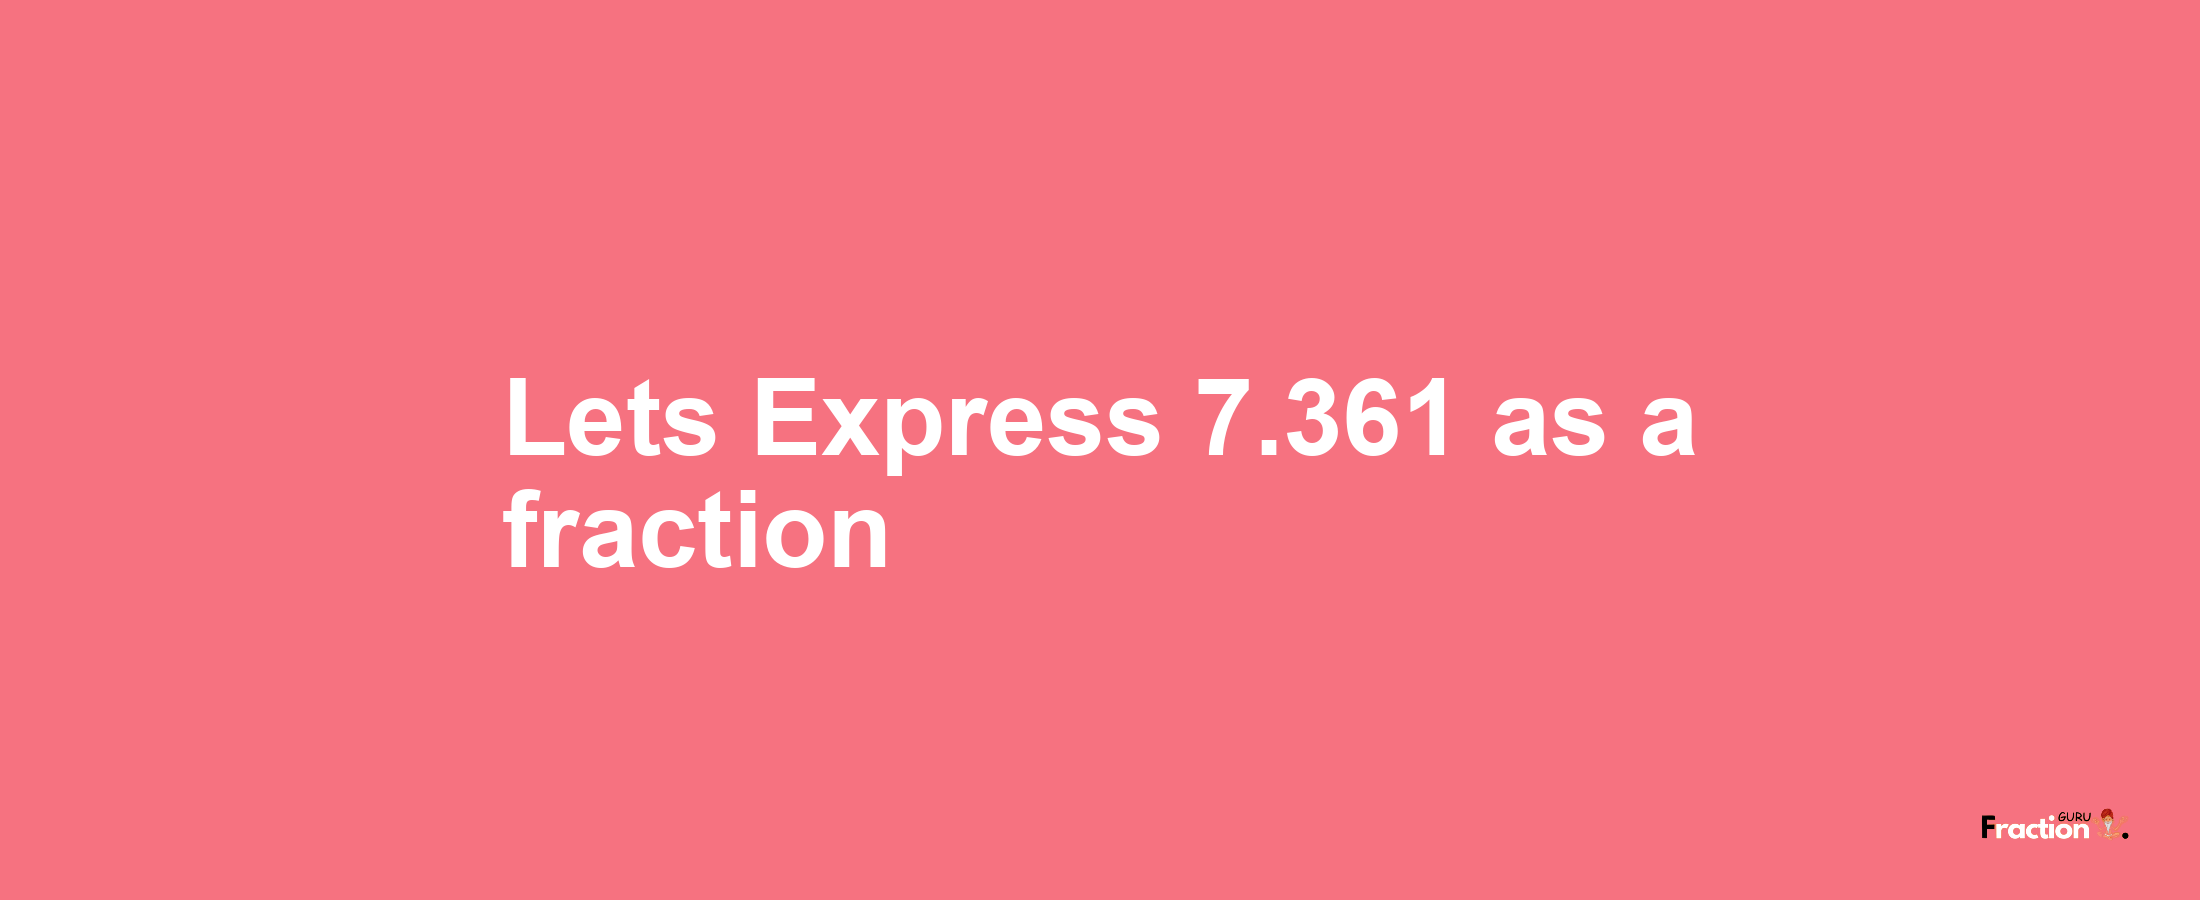 Lets Express 7.361 as afraction